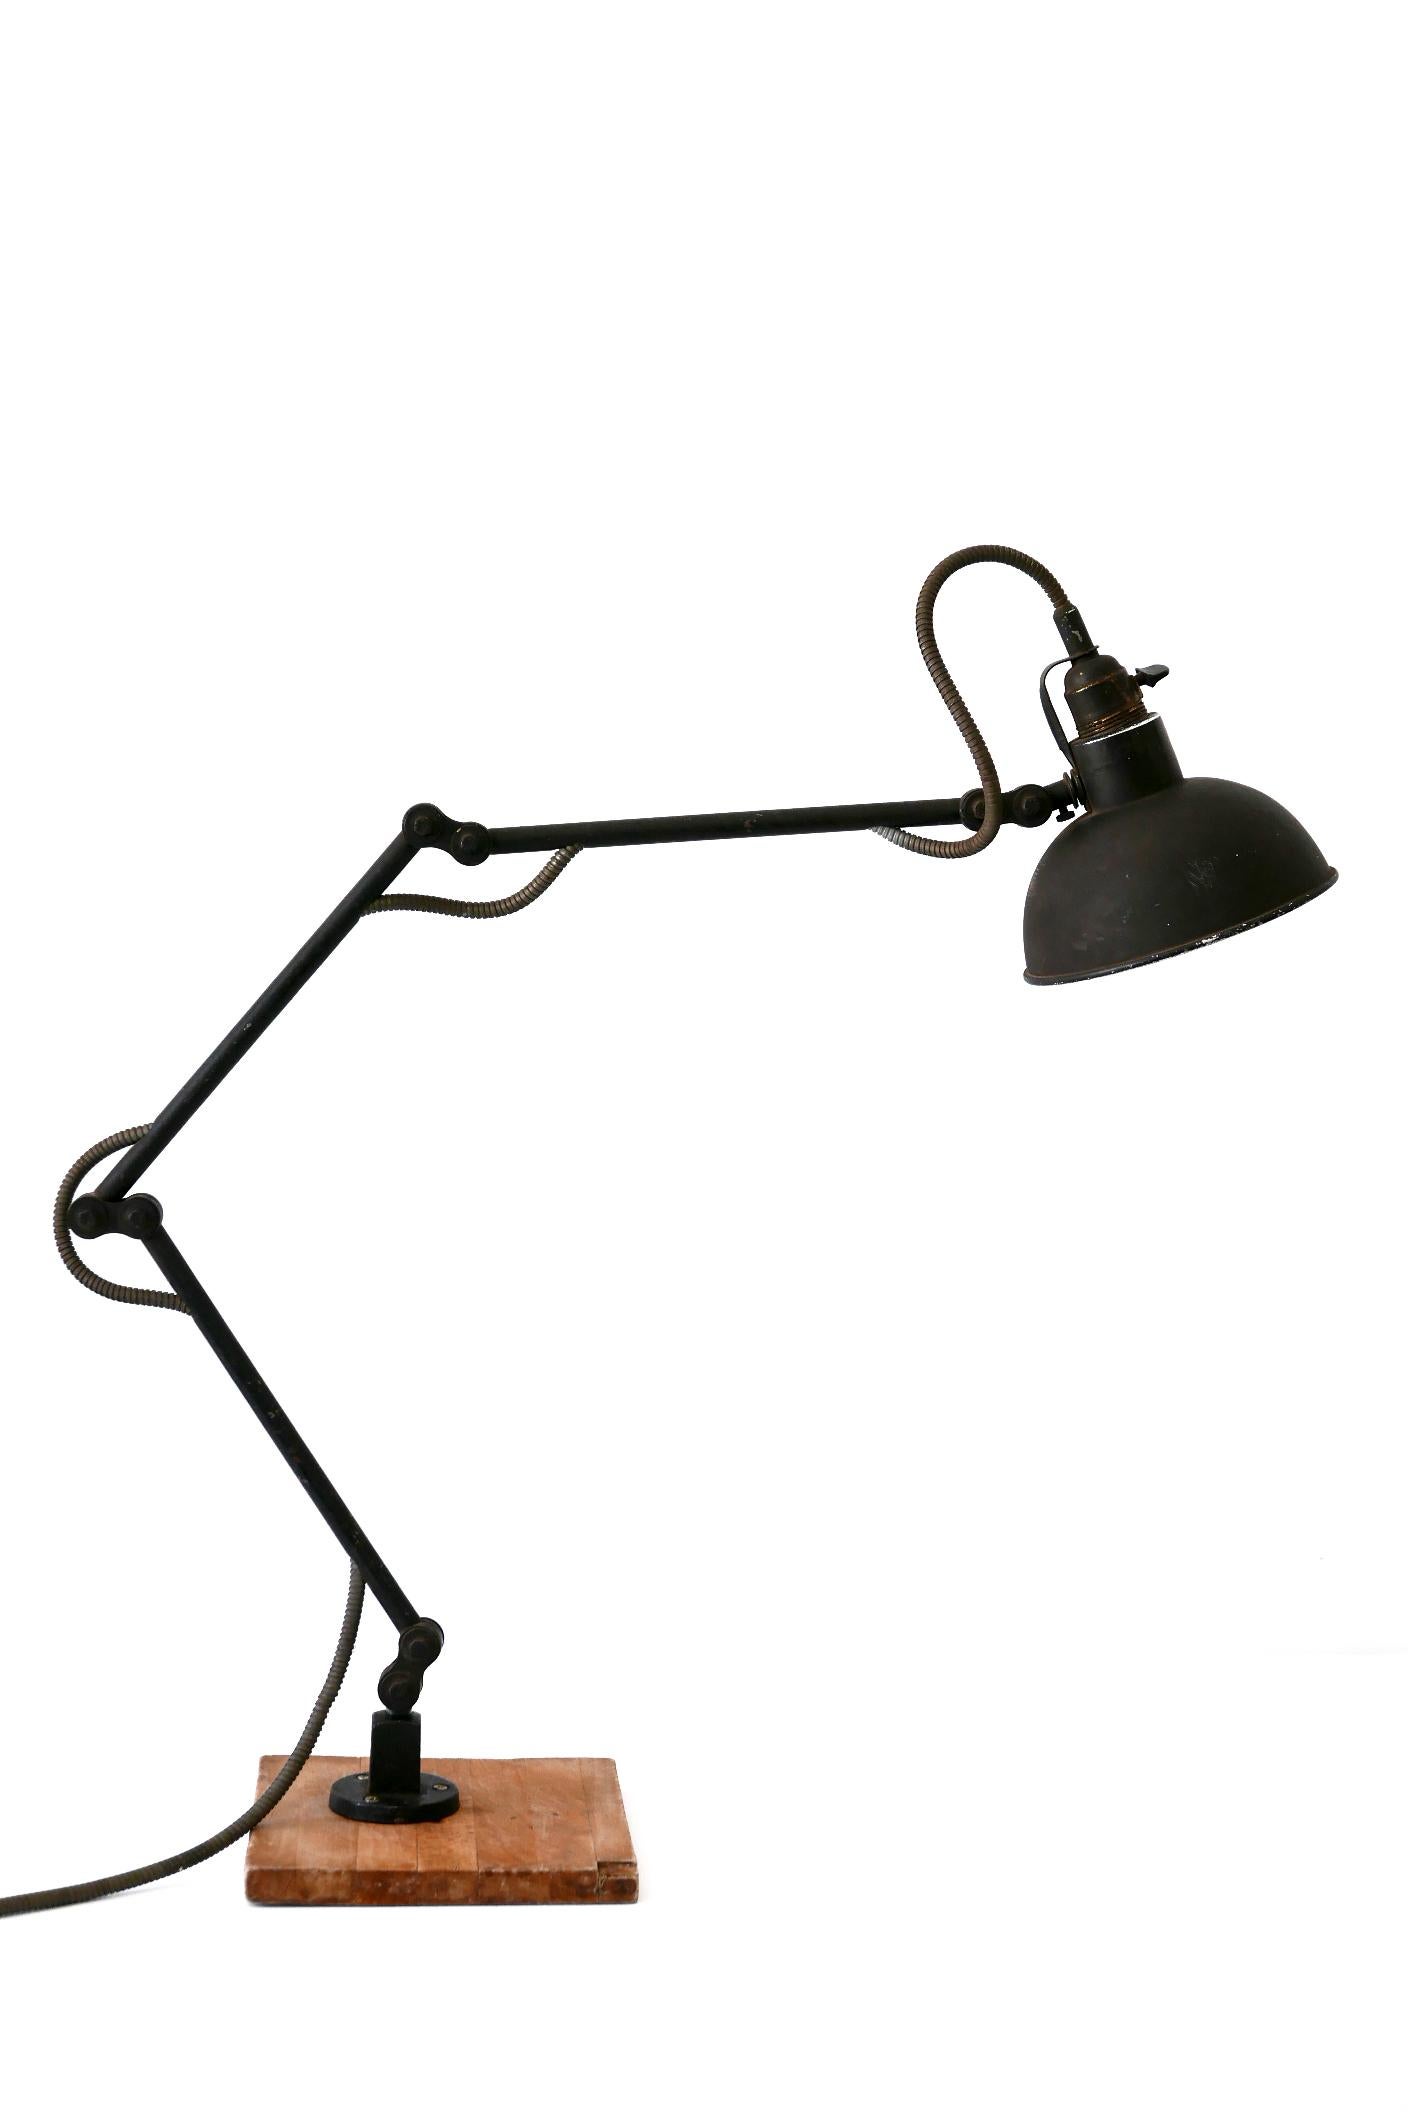 Exceptional Articulated Bauhaus Workshop Wall Lamp or Task Light 1920s Germany For Sale 5